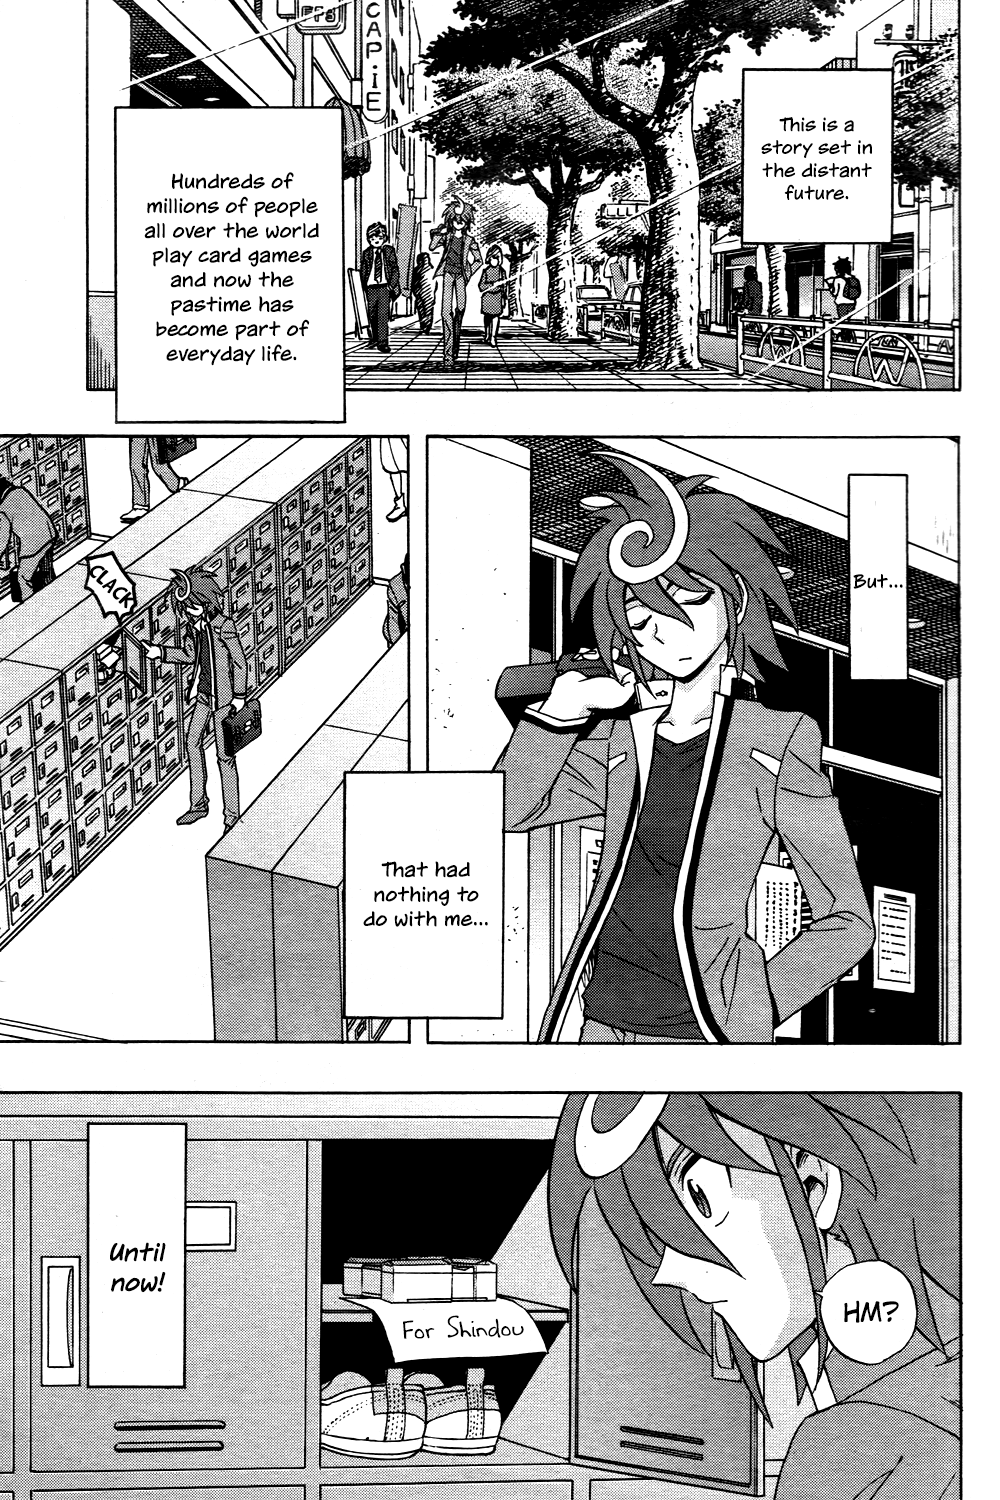 Cardfight!! Vanguard G: The Prologue - Page 1